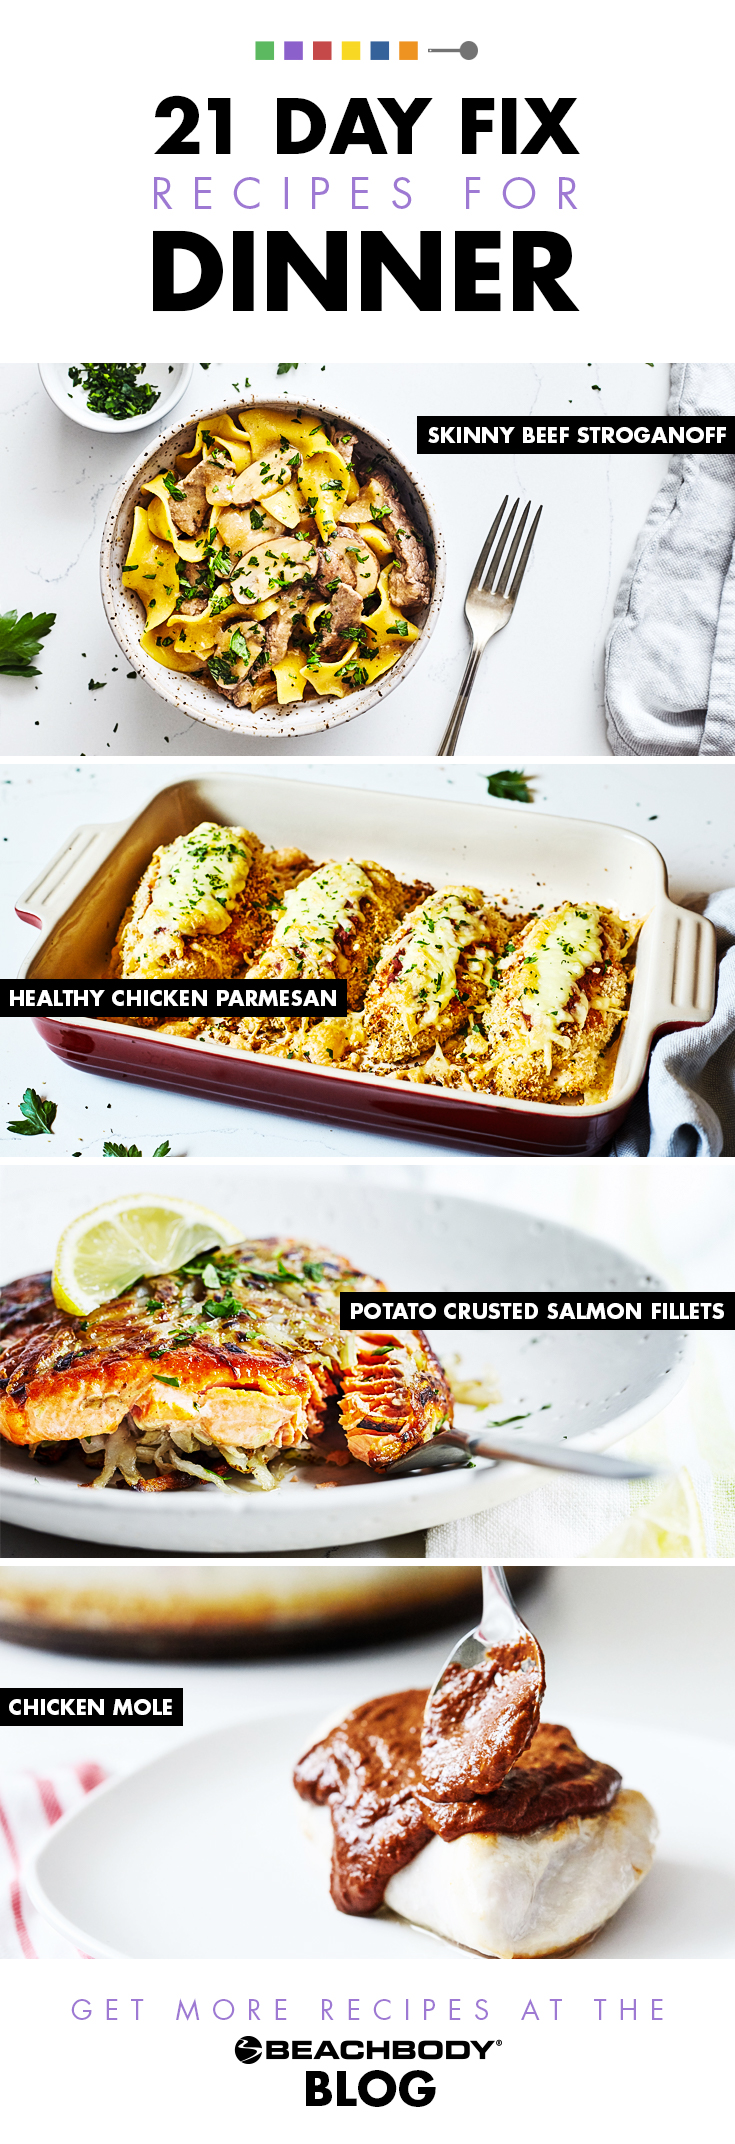 21 Day Fix Dinner-Recipes PIN